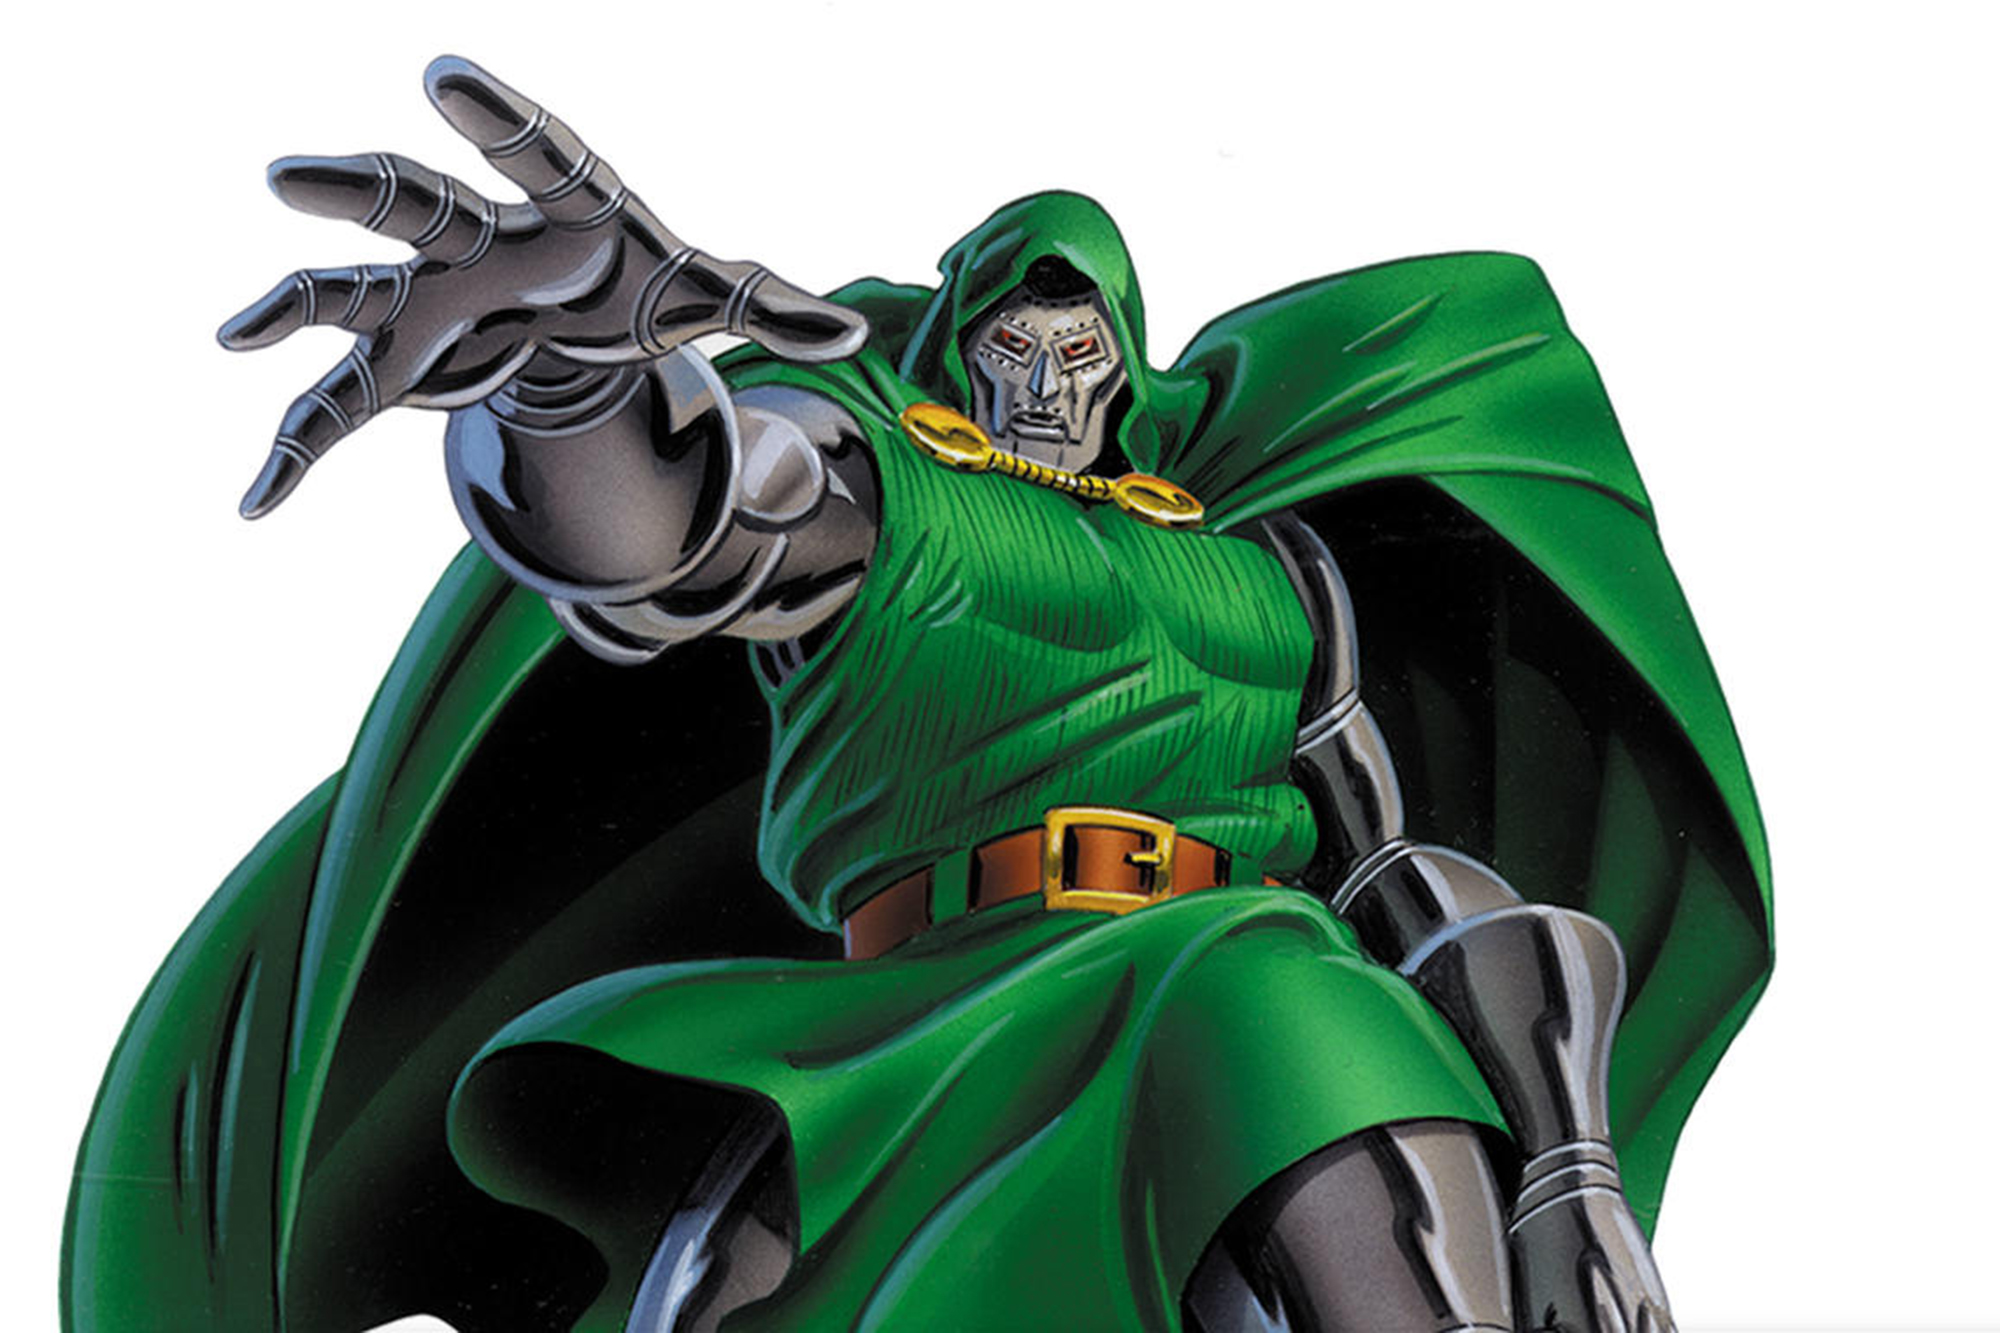 The upcoming Fantastic Four film has a chance to get much right about Dr. Doom that hasn't appeared in films yet.